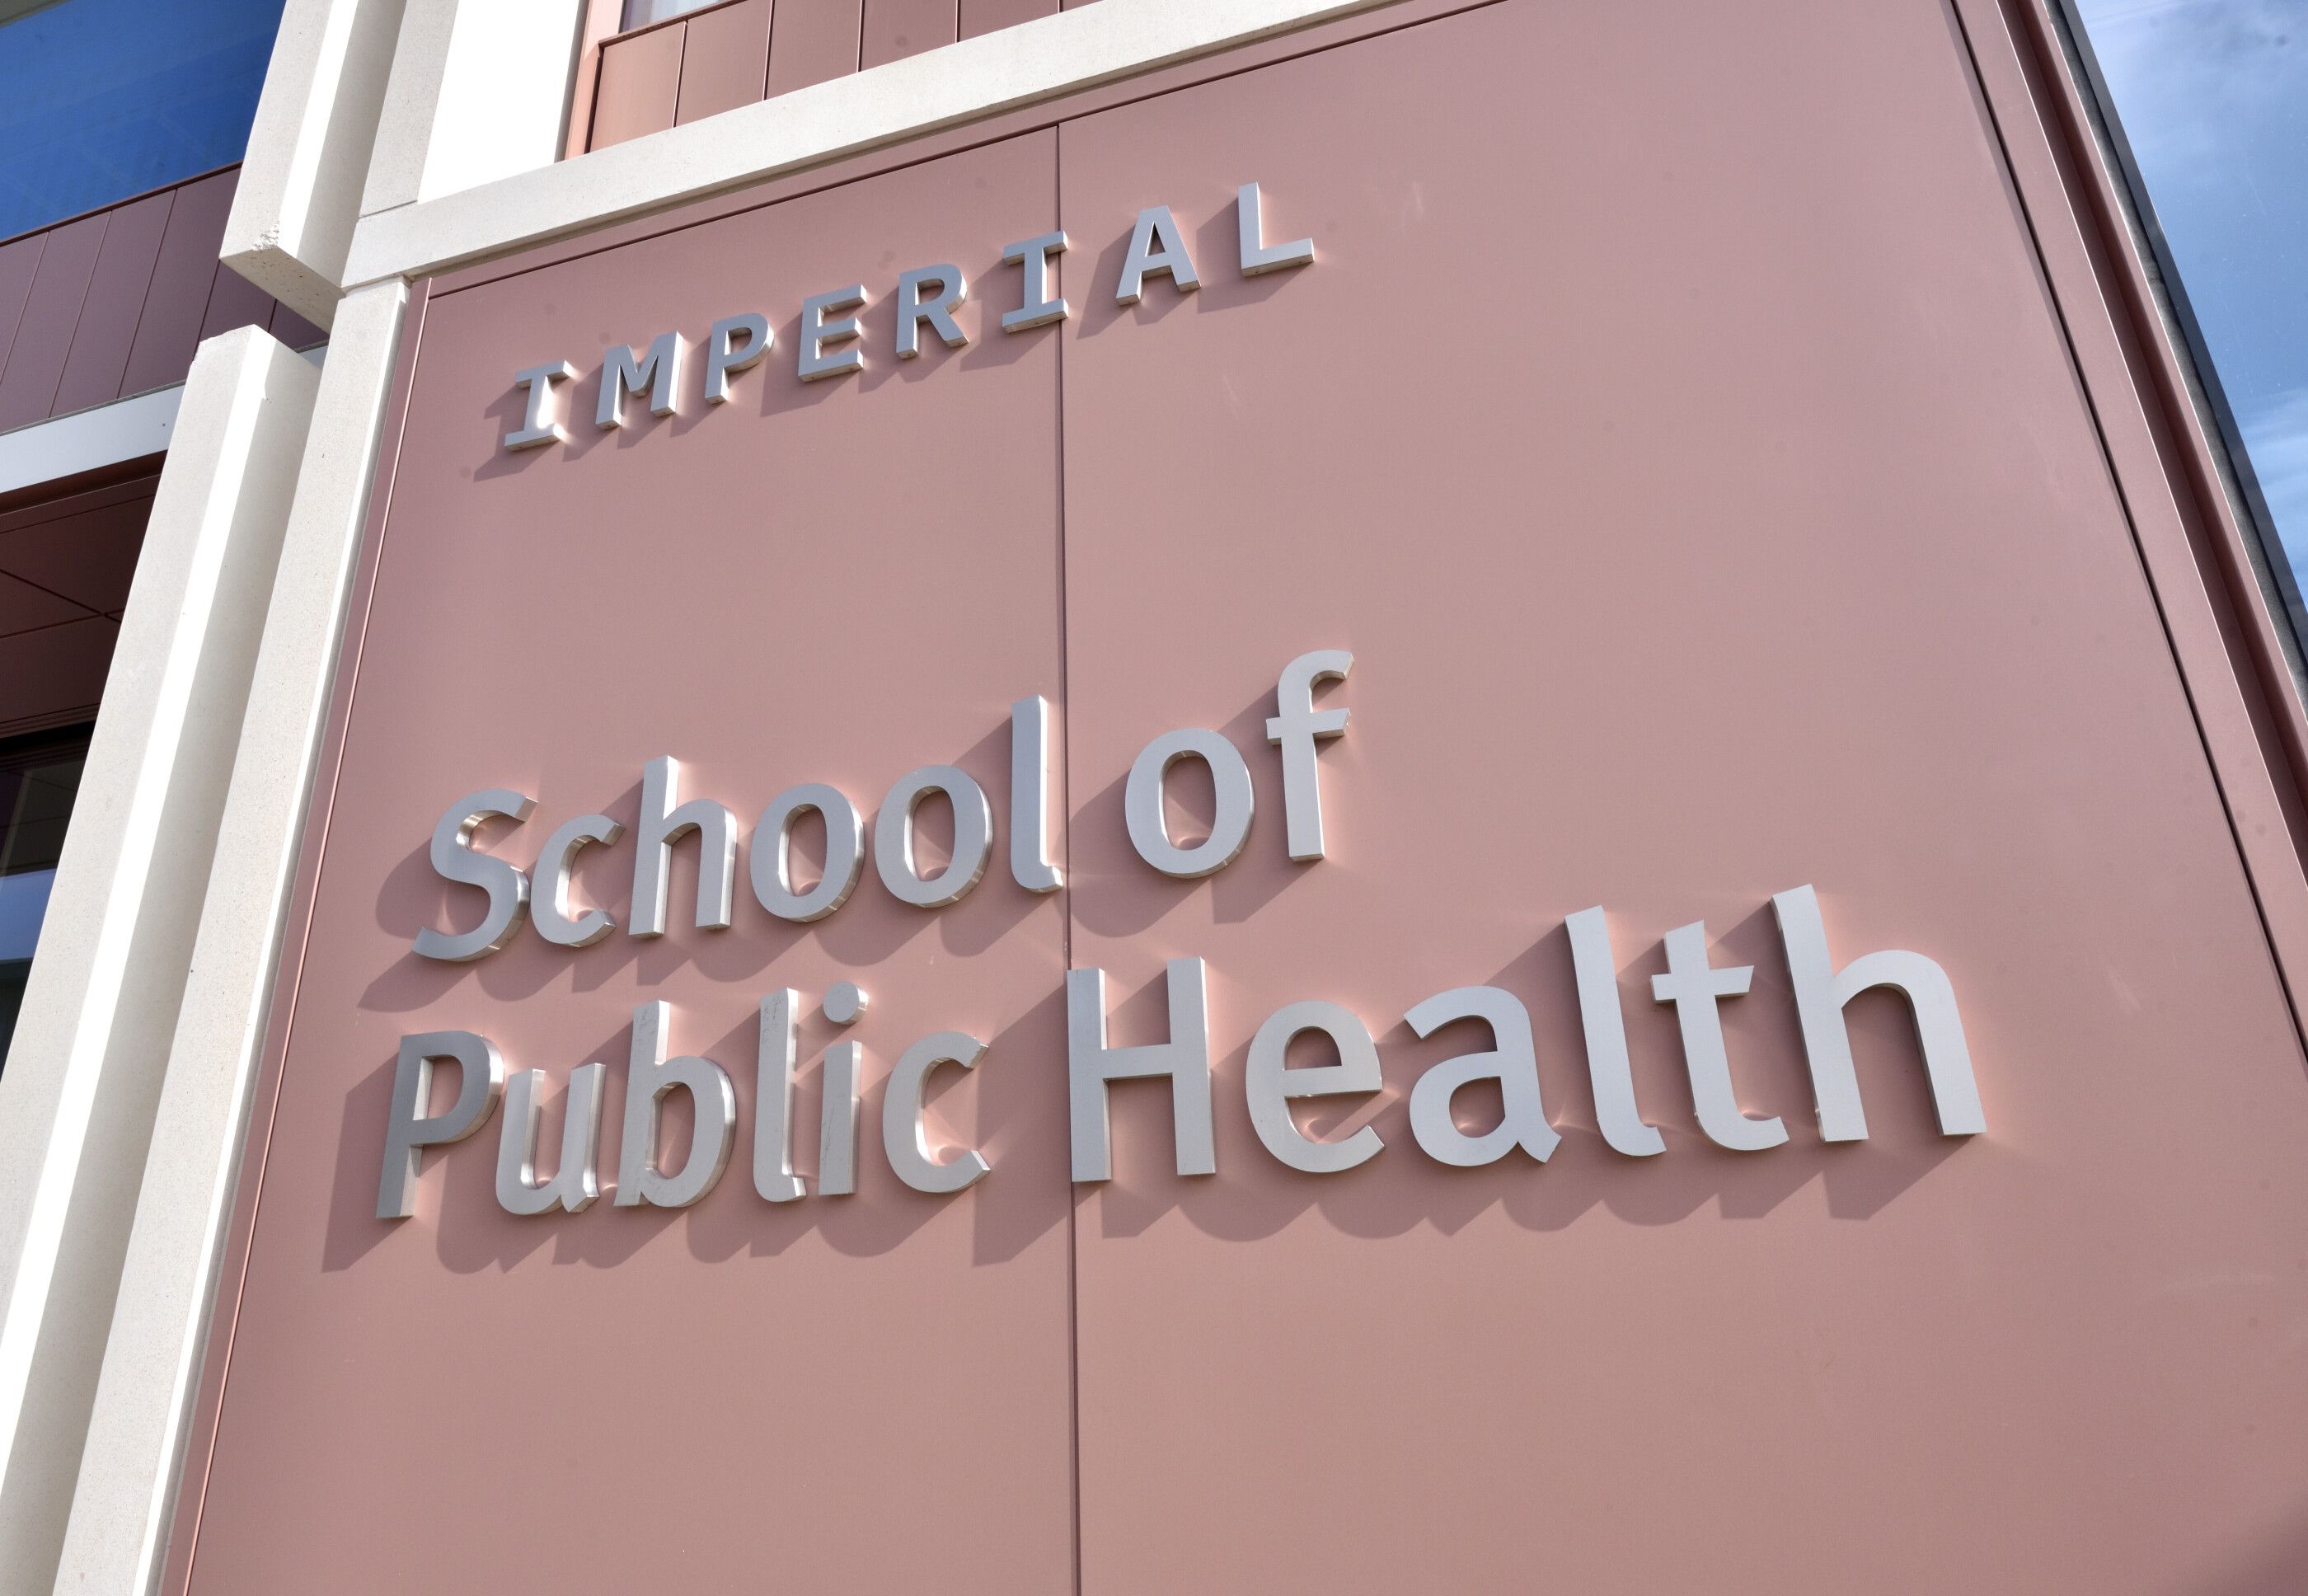 The sign of the new School of Public Health building